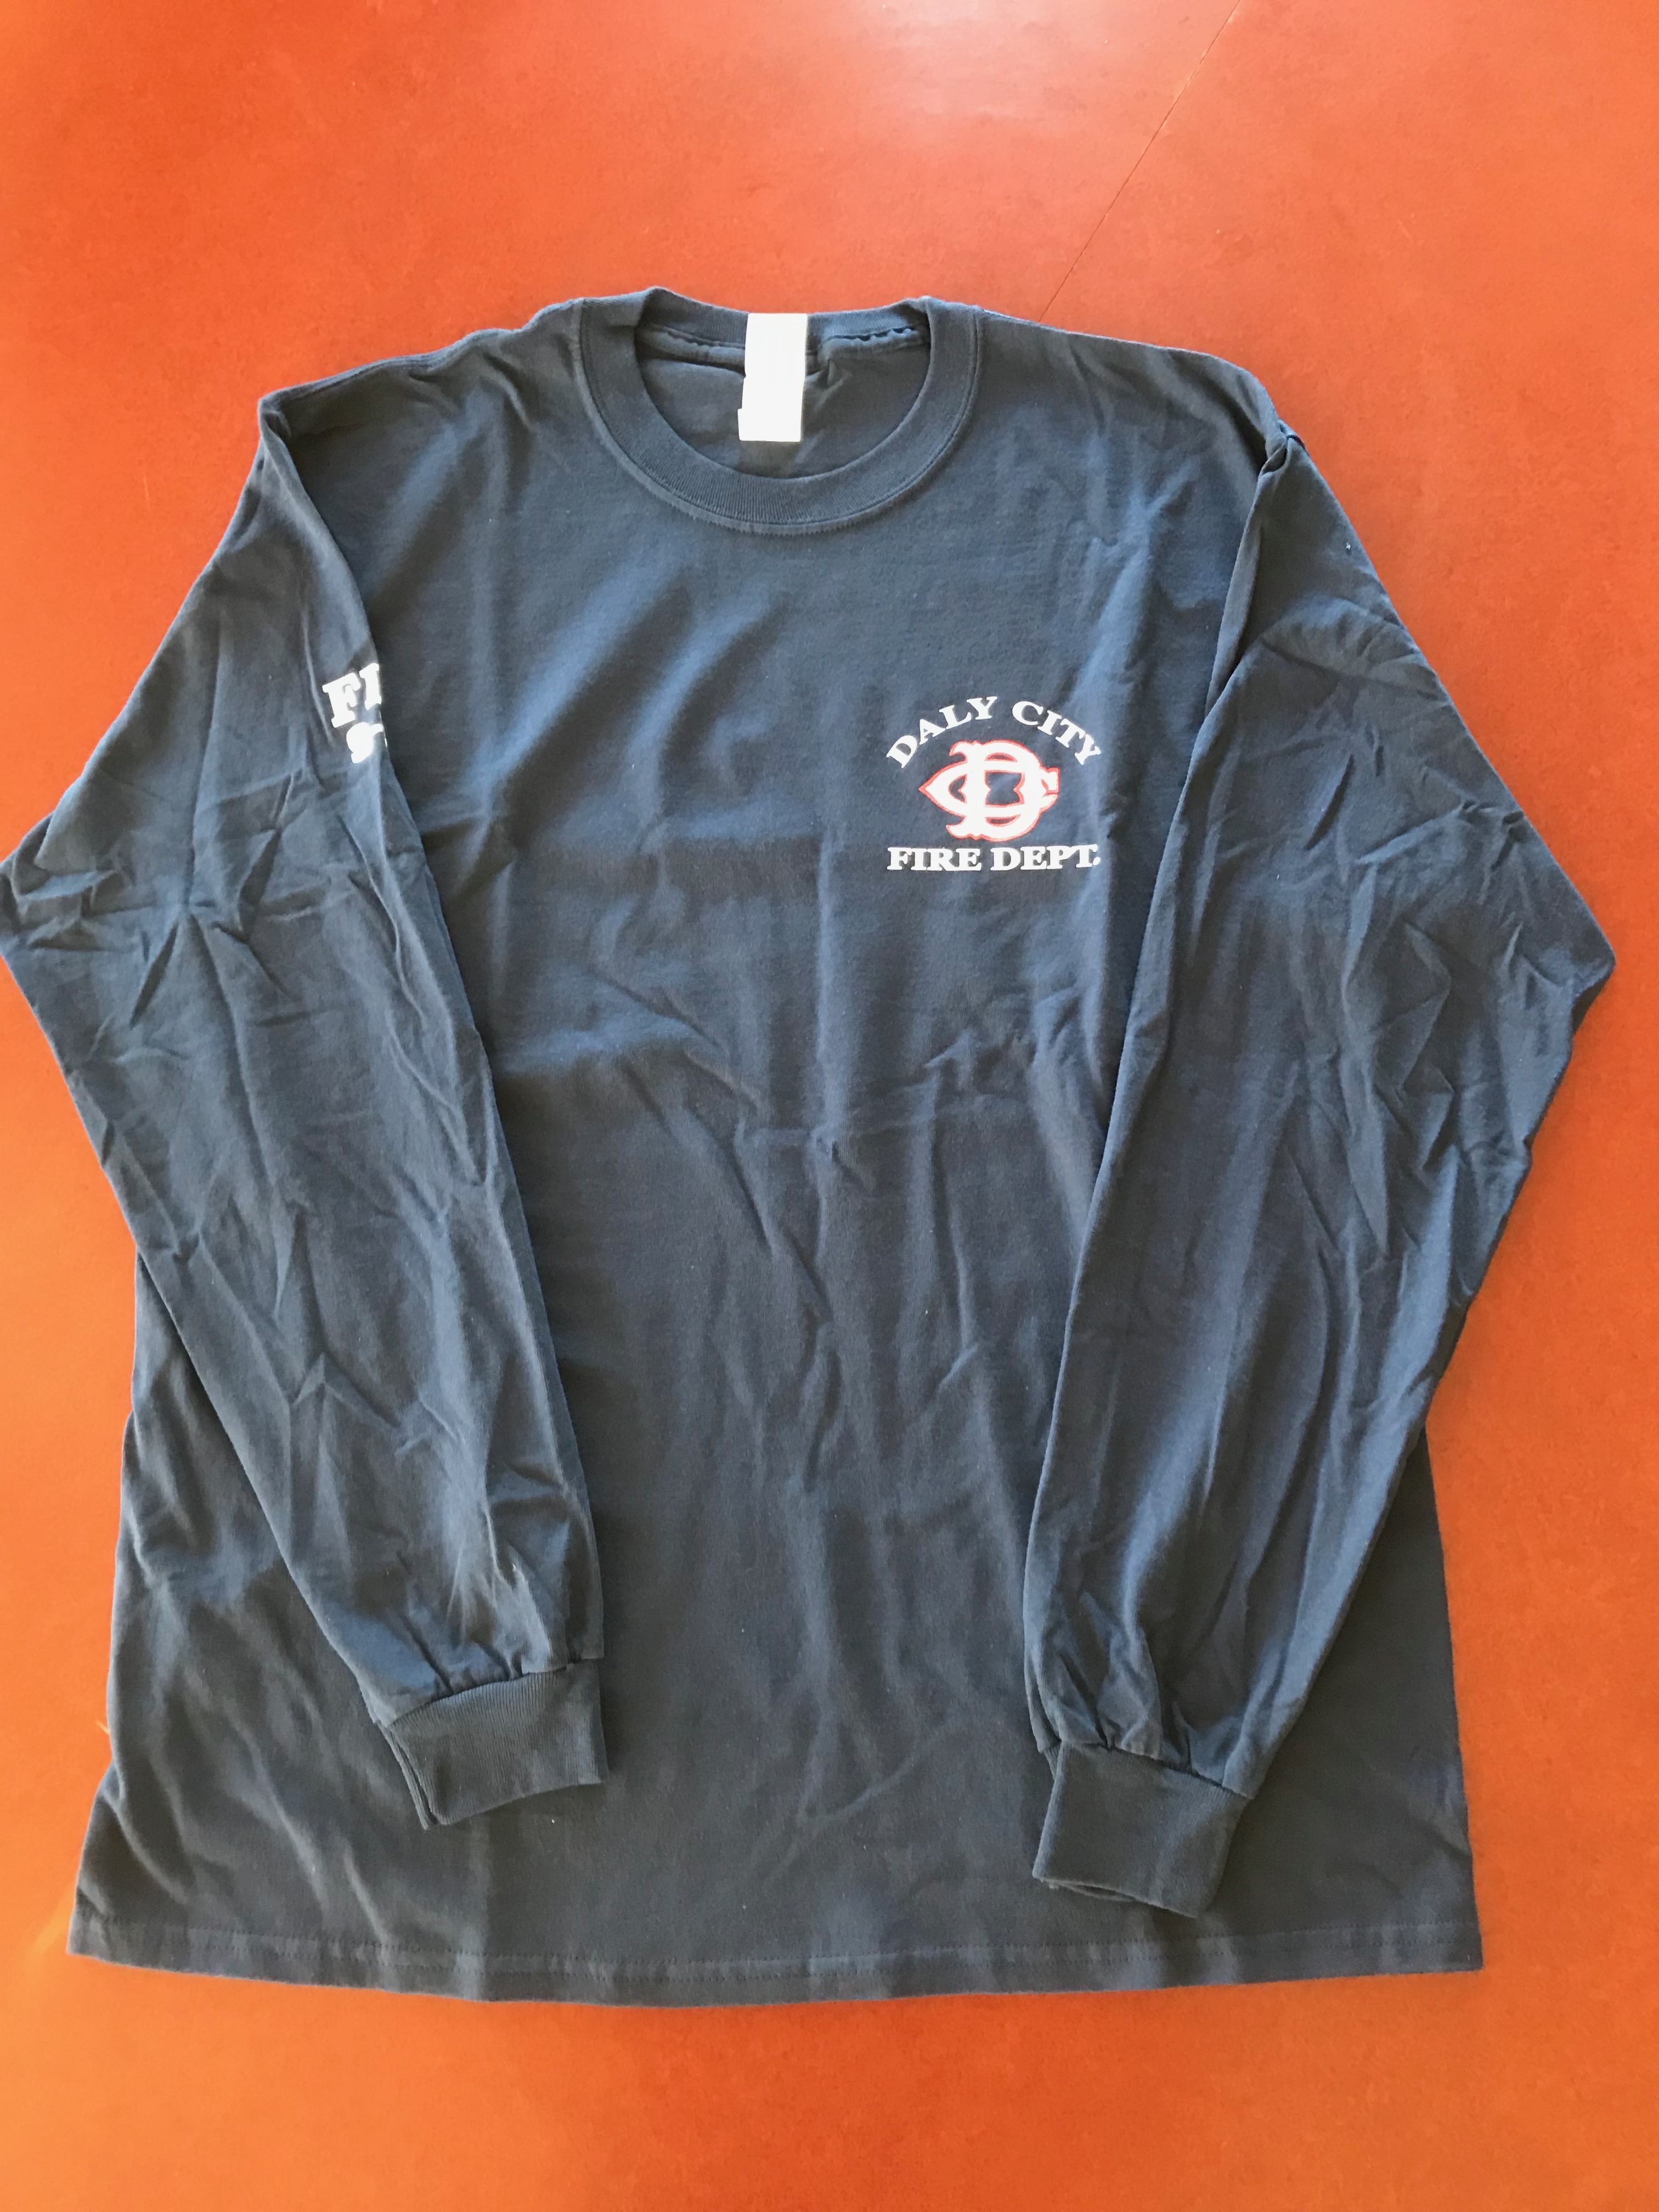 Long Sleeve T- DCFD – Daly City Firefighters